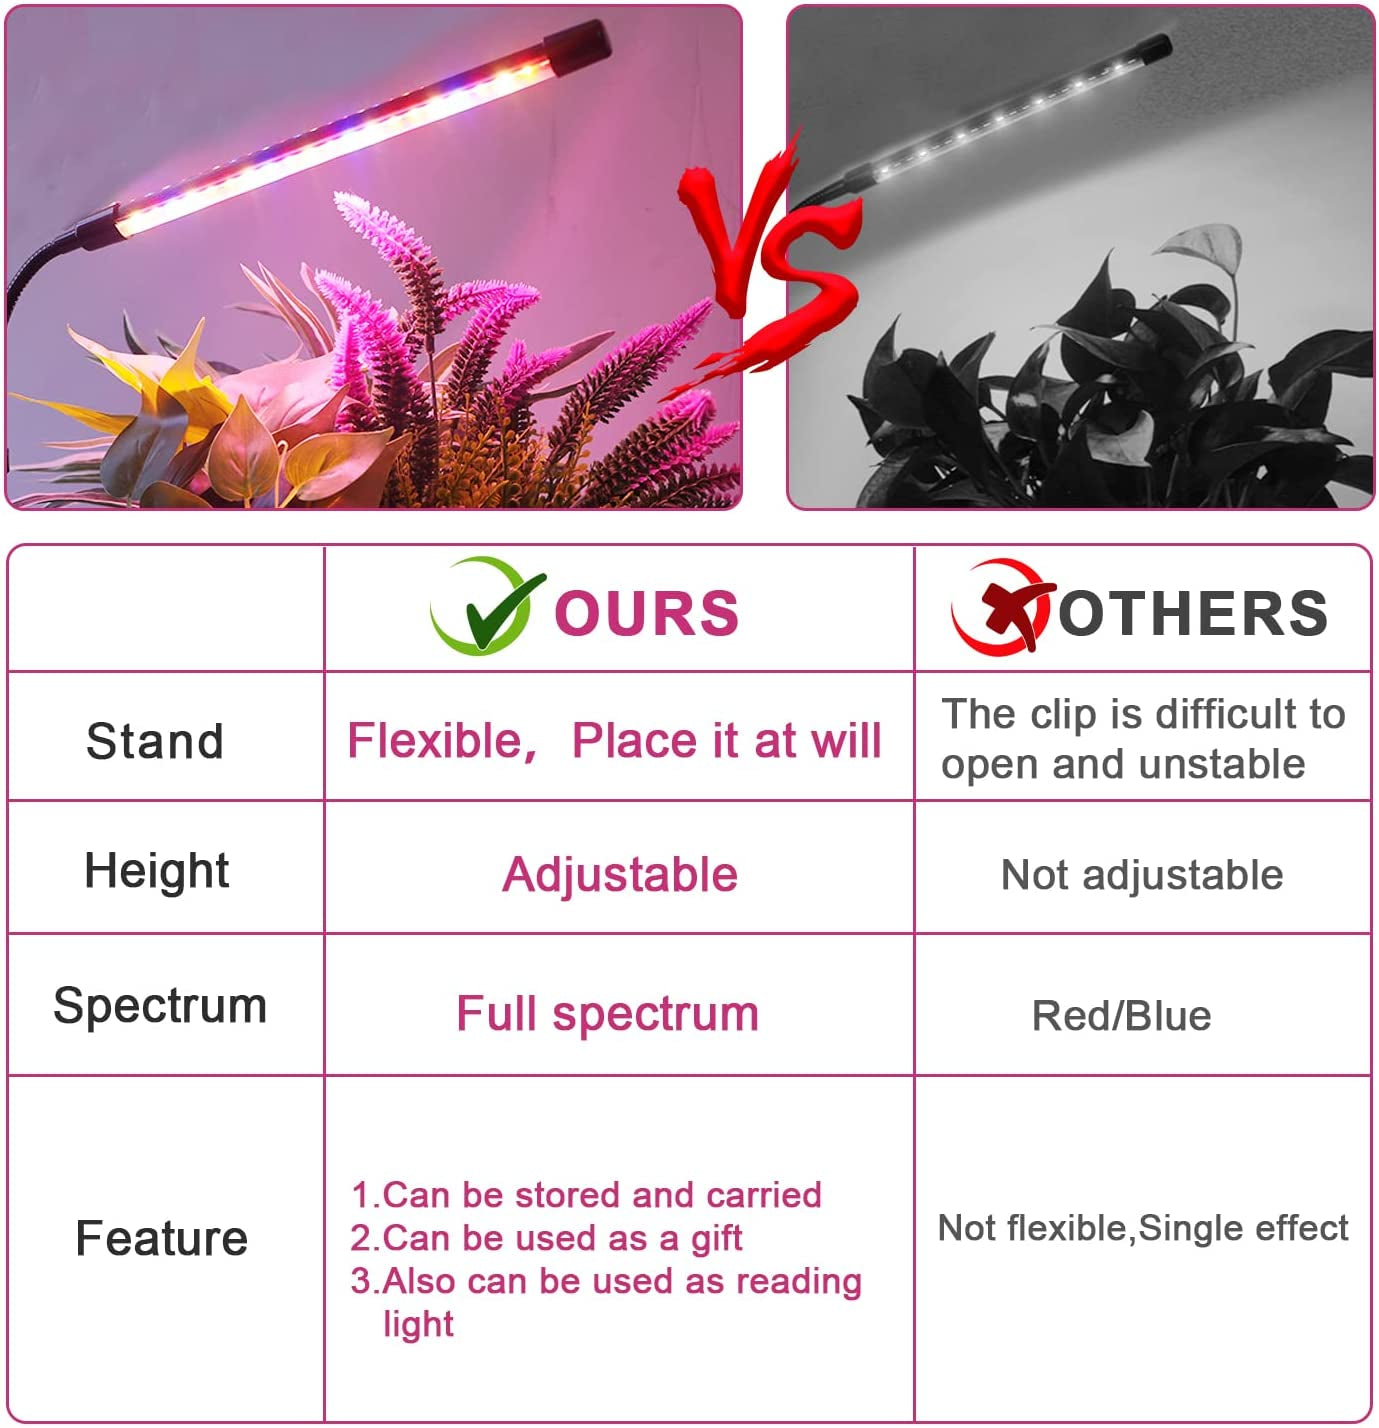 Ldmhlho LED Plant Lights with Small Stakes Tripod, Full Spectrum Grow Lamp with 3H/9H/12H Timing On&Off & 3 Switch Modes and Adjustable Gooseneck for Indoor Plants